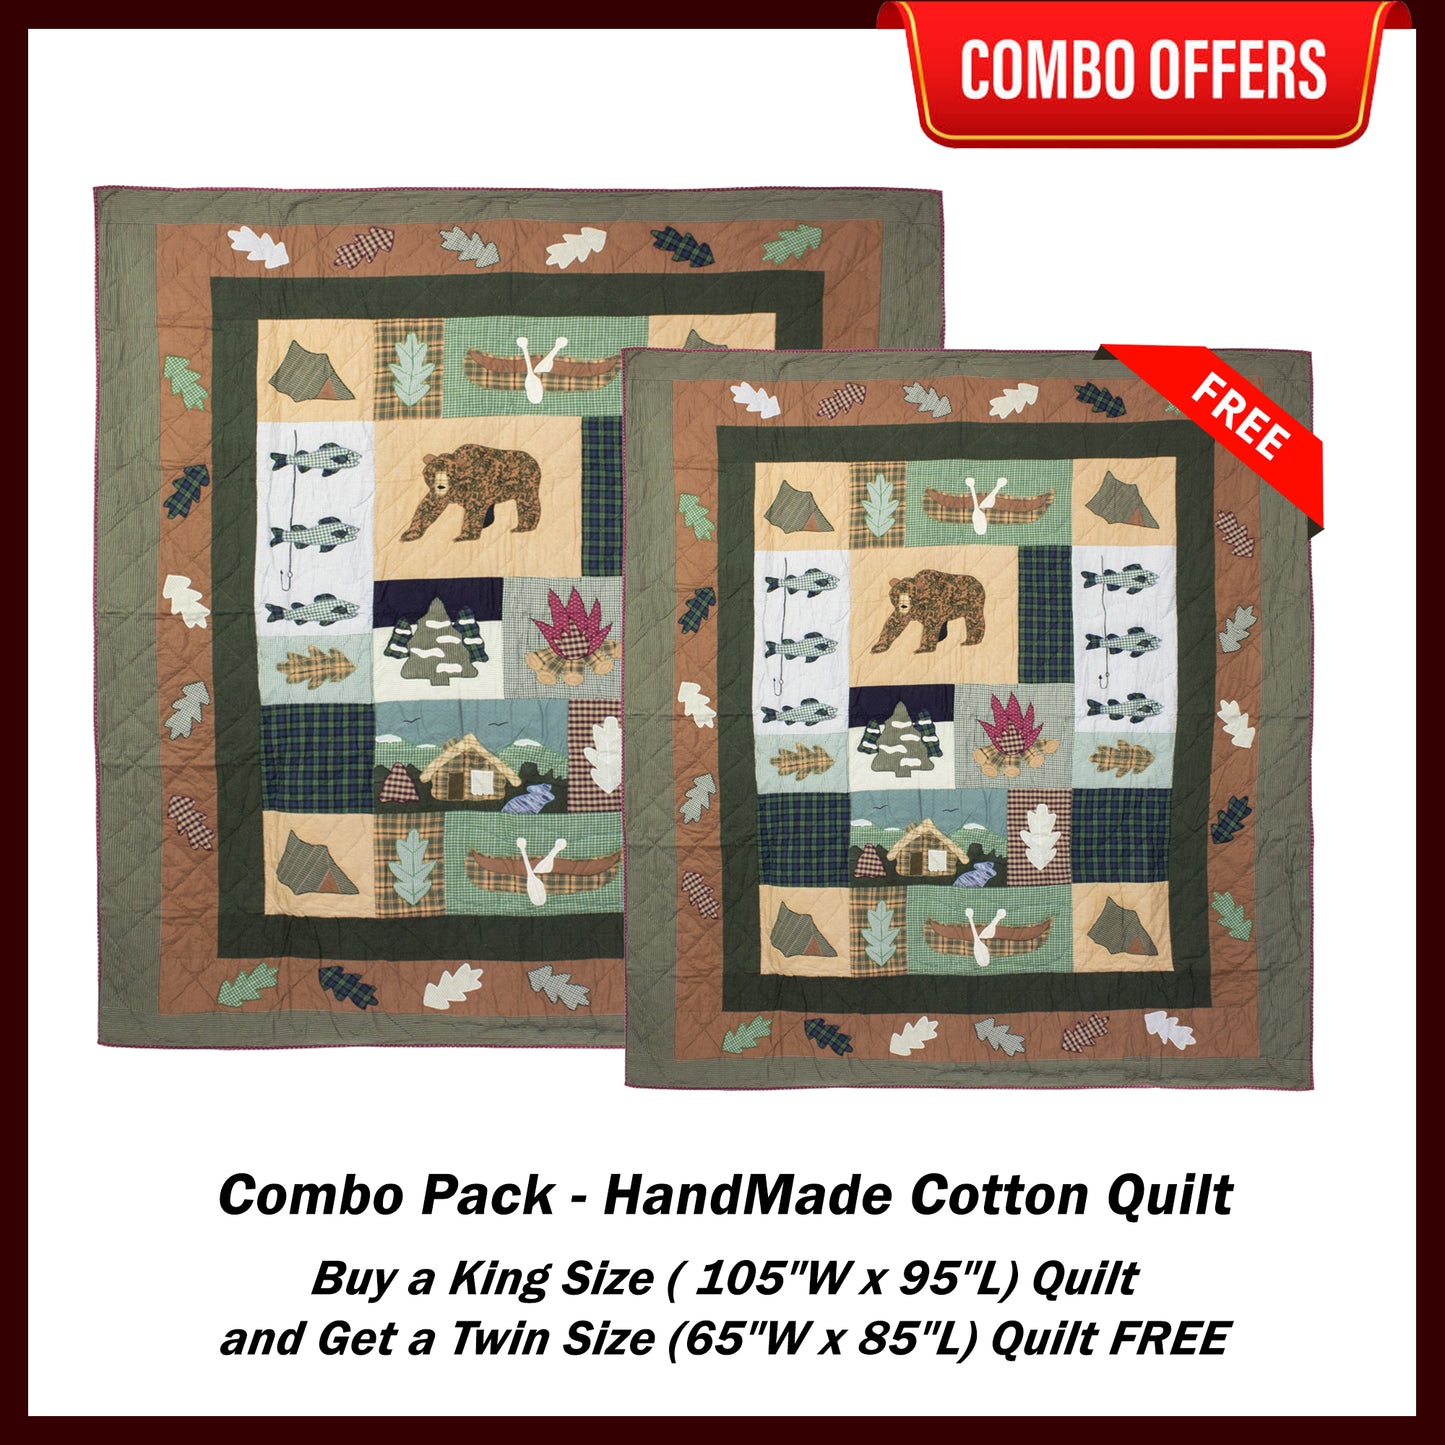 Cabin Handmade Cotton Quilt - Buy a King Size Quilt and Get a Twin Size Quilt FREE